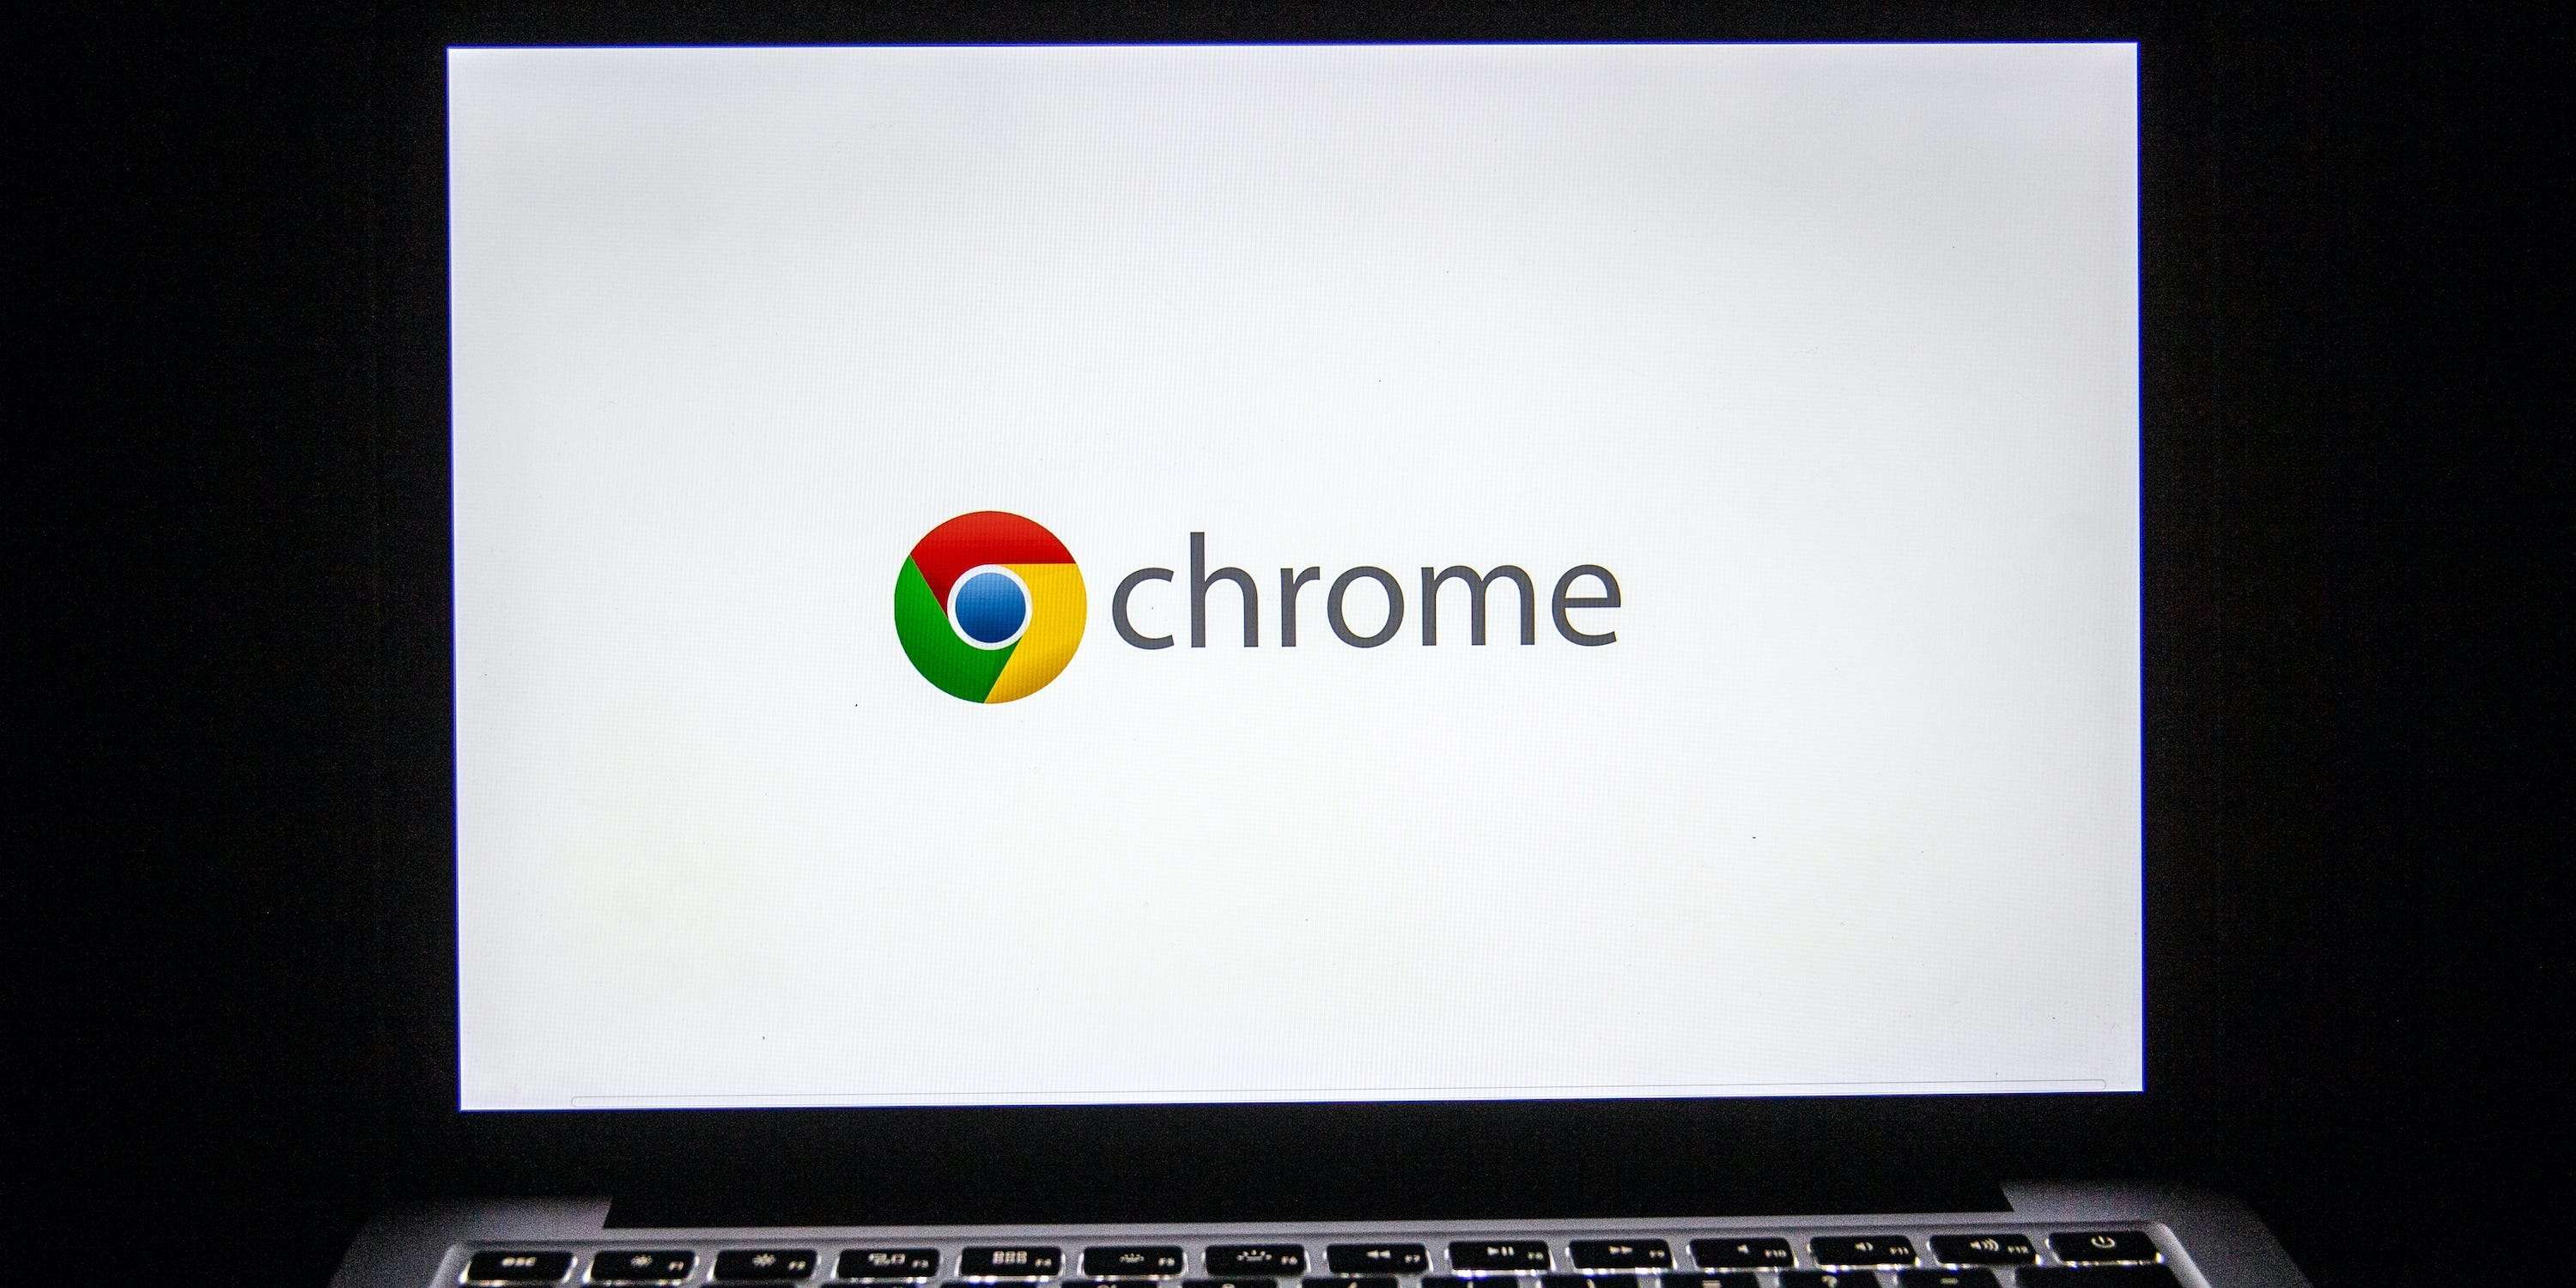 retweeting on chrome on my mac does not allow for videos or pictures